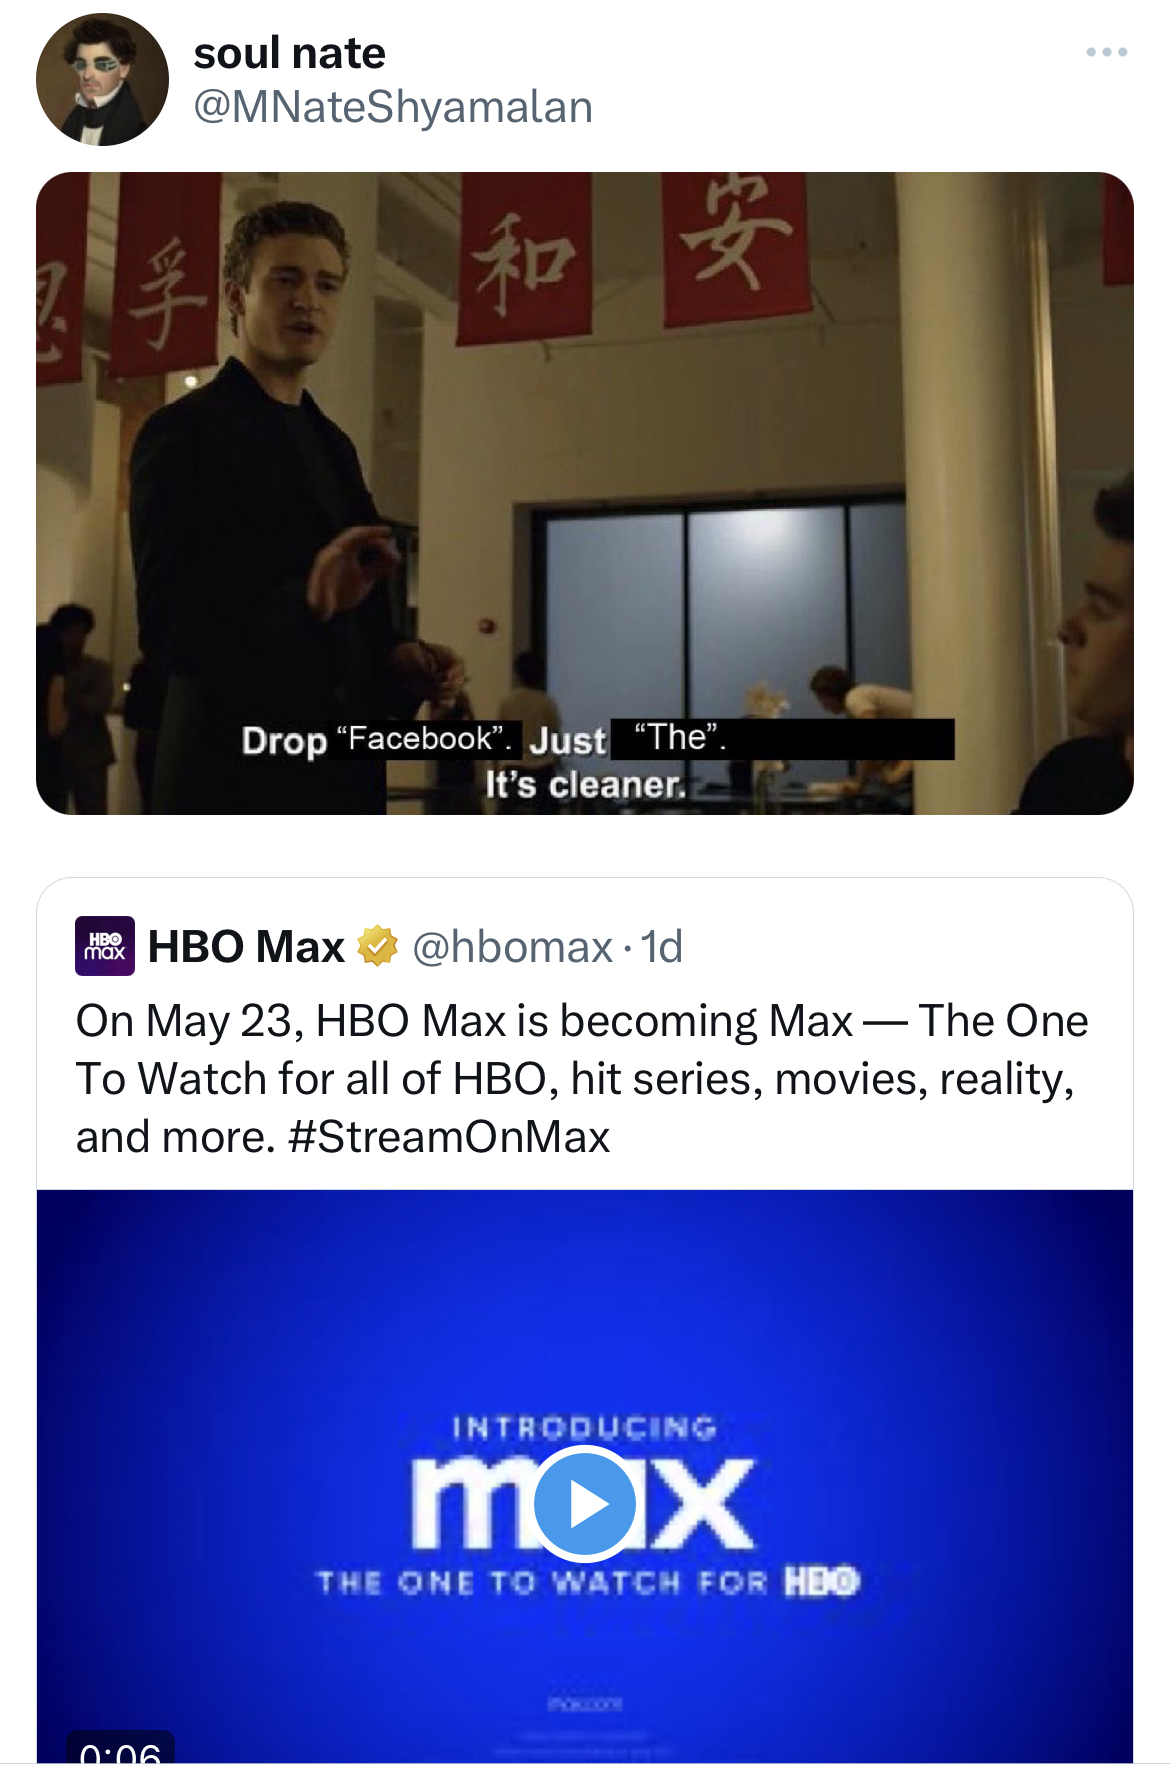 savage tweets - communication - D Ha soul nate 117 Drop Facebook". Just "The". It's cleaner. Hbo Max On May 23, Hbo Max is becoming MaxThe One To Watch for all of Hbo, hit series, movies, reality, and more. Introducing max The One To Watch For Hbo Pourr w